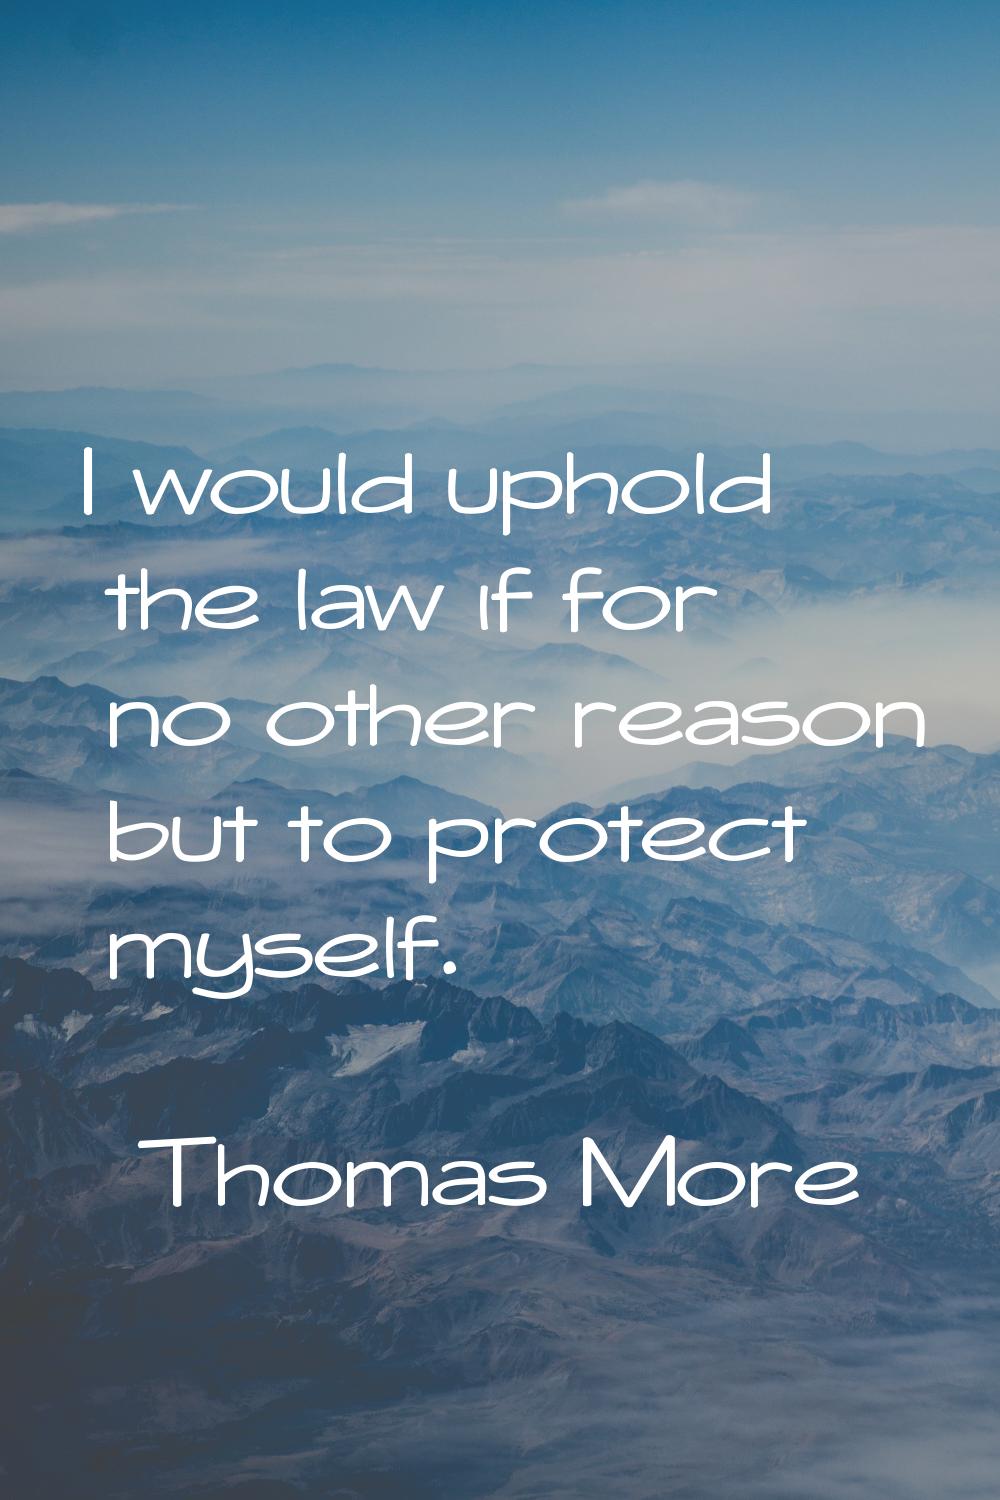 I would uphold the law if for no other reason but to protect myself.